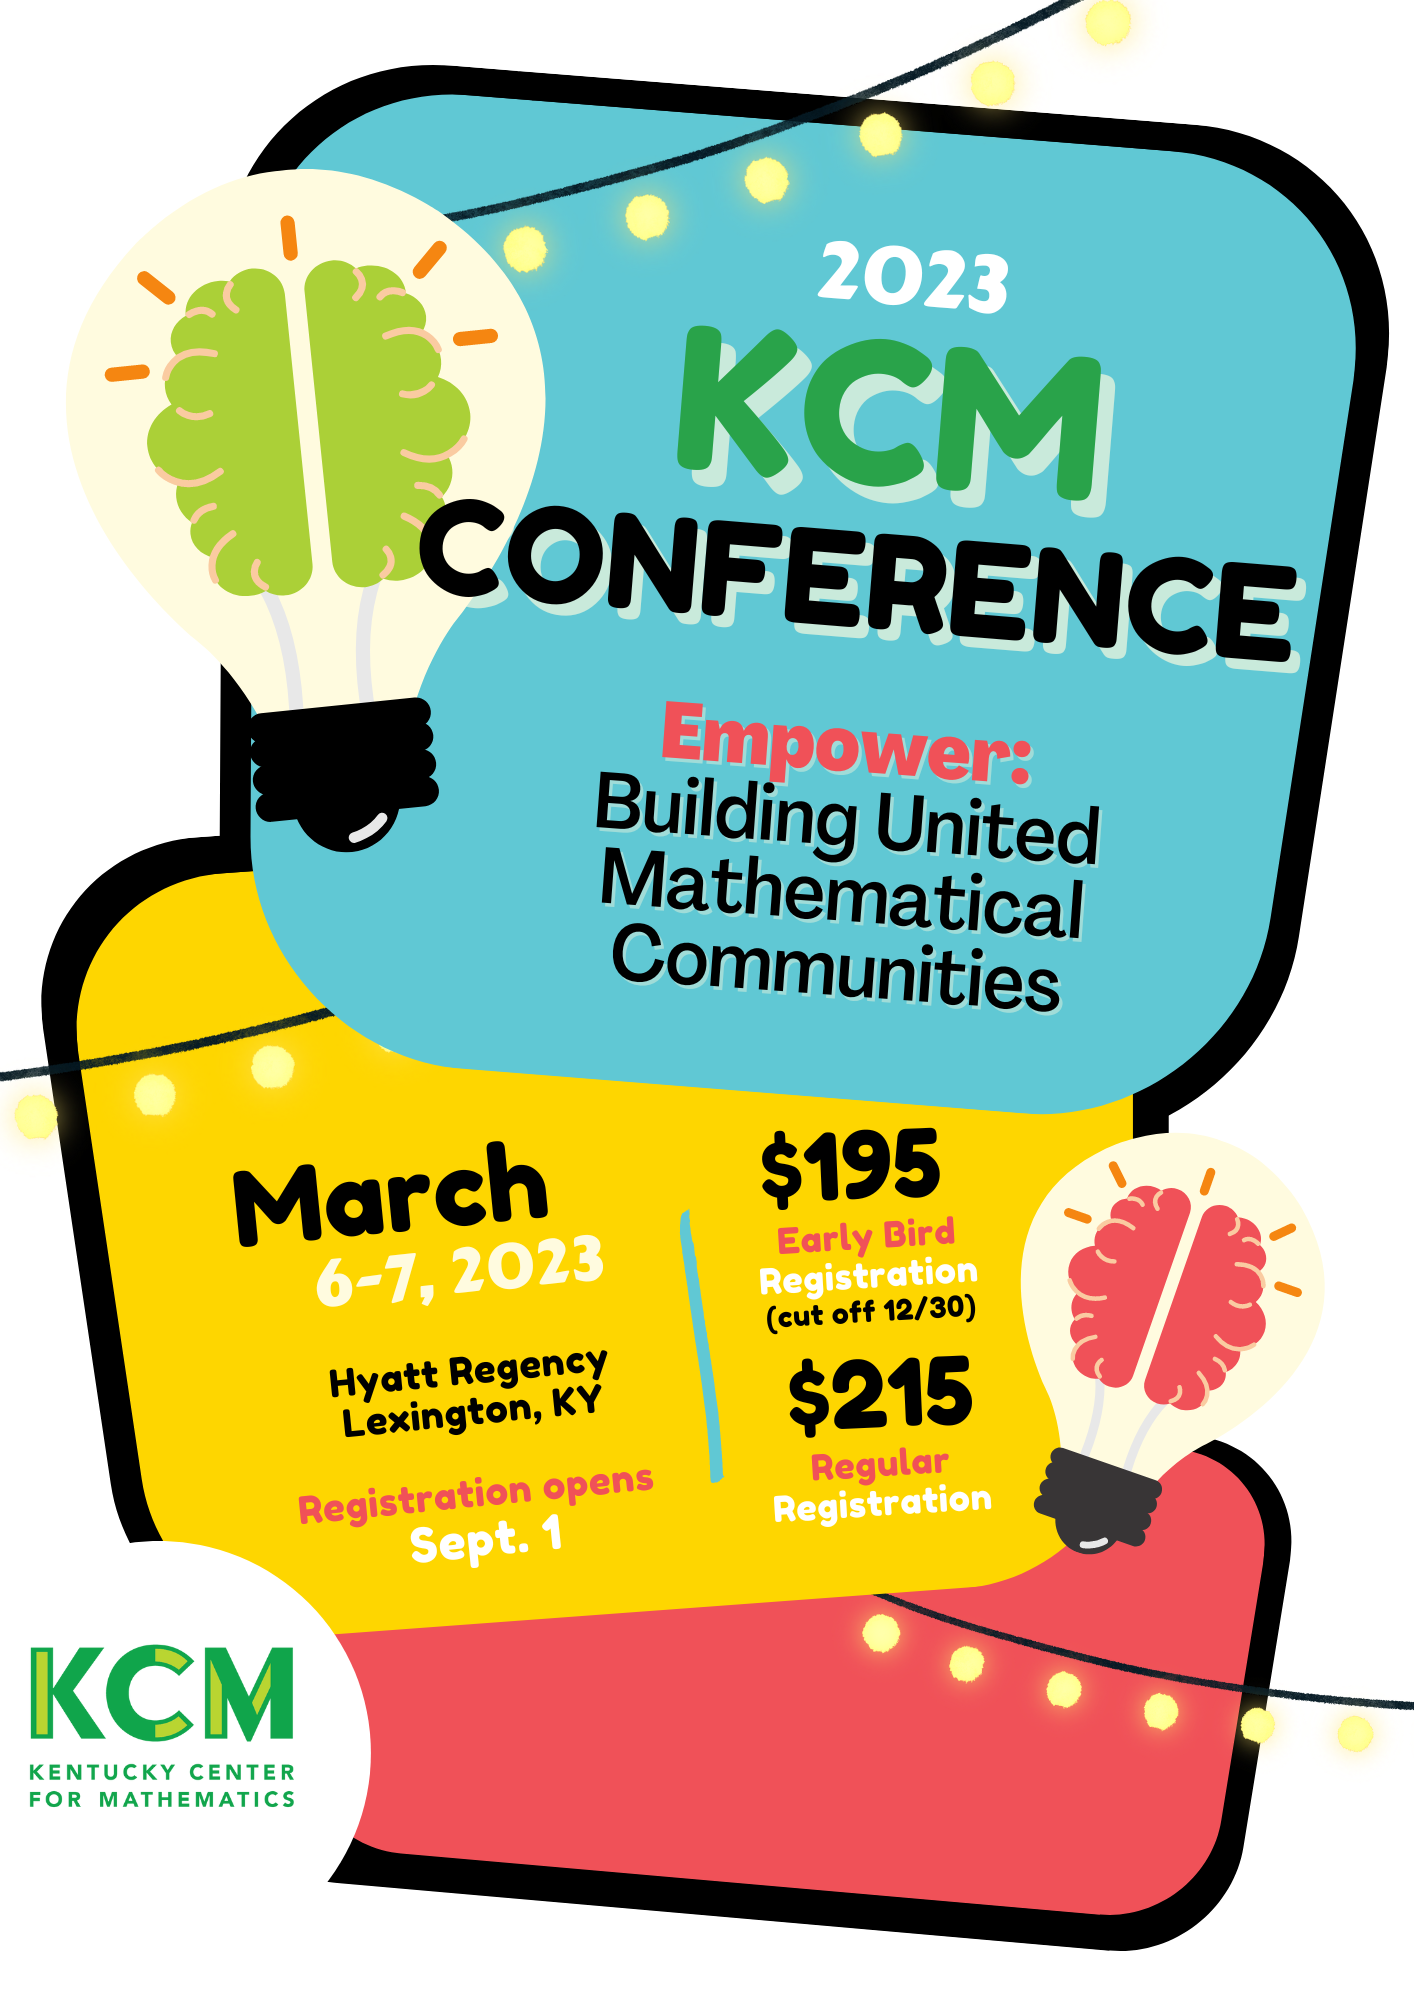 2023 KCM Conference March 6-7, 2023 at the Hyatt in Lexington